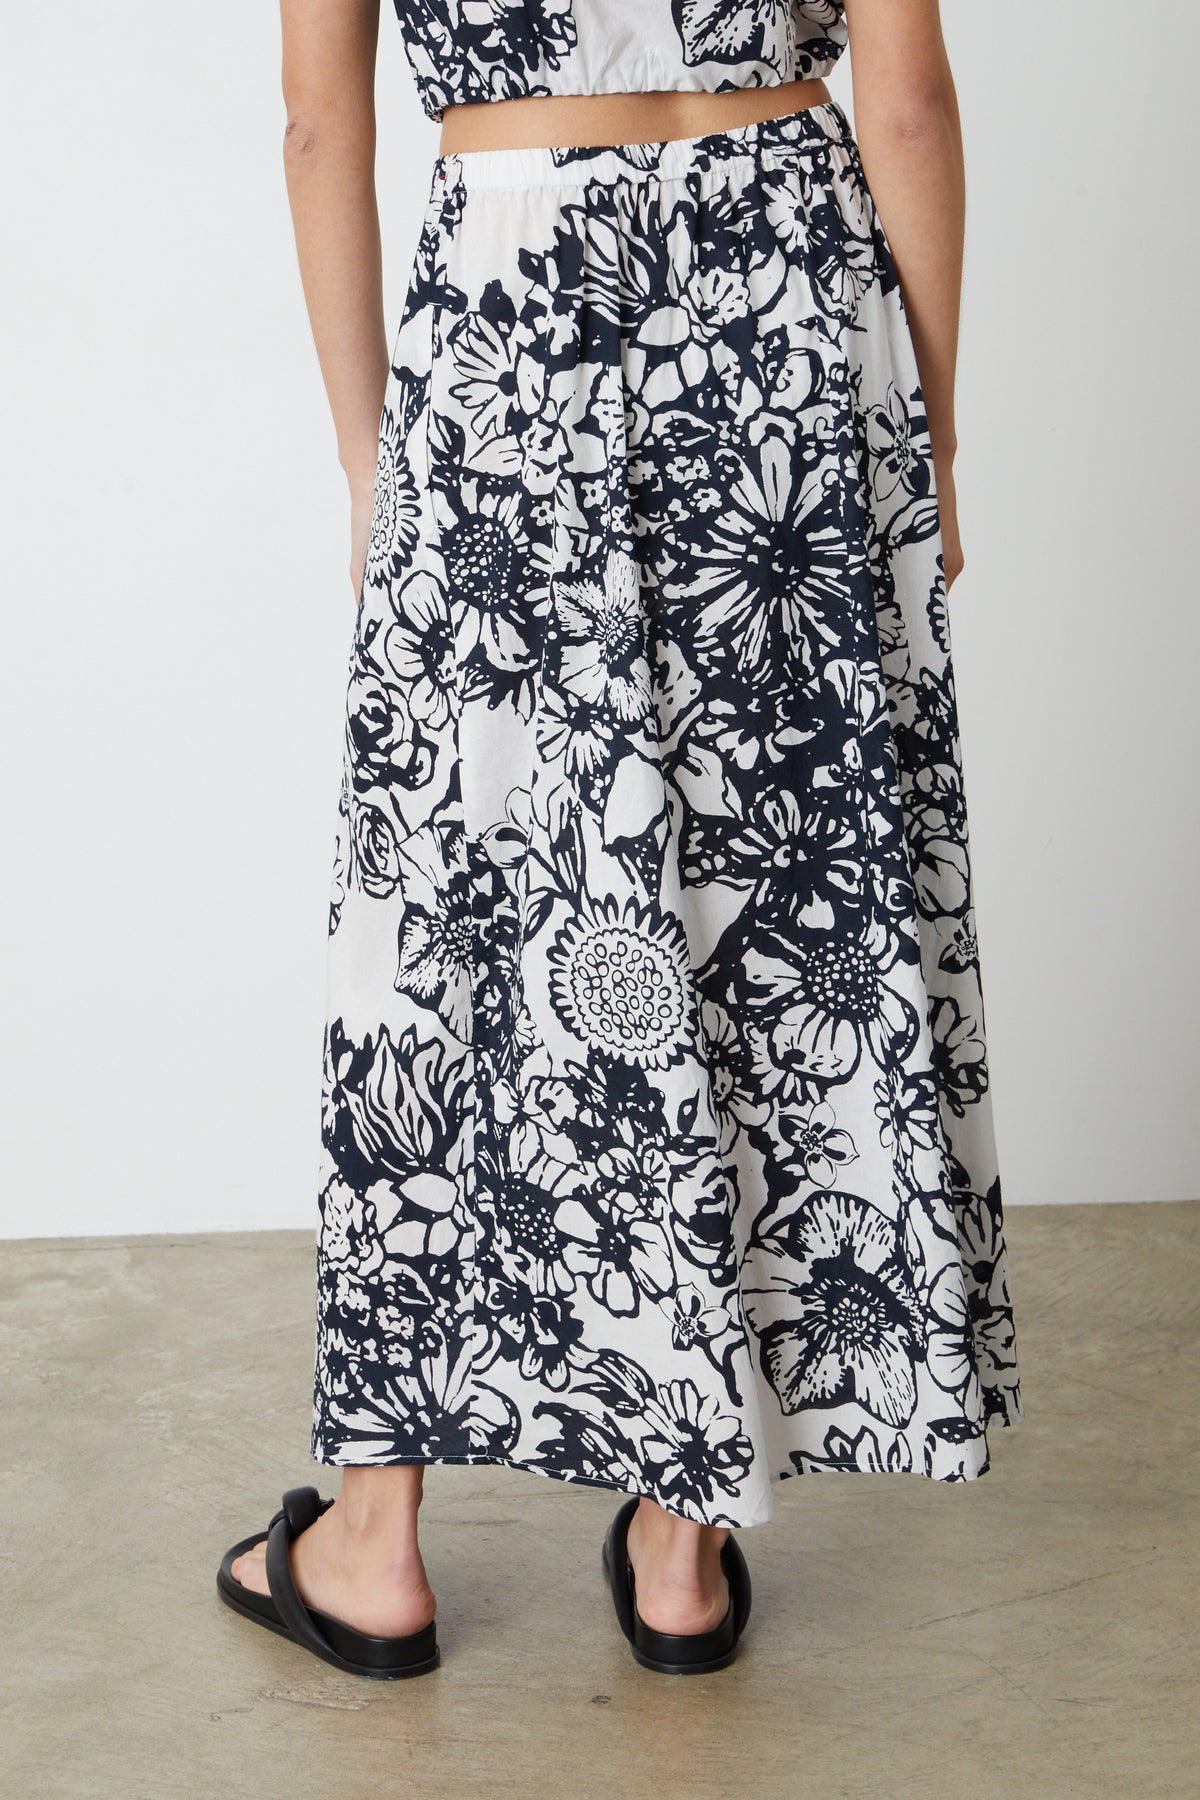   The back view of a person wearing a Velvet by Graham & Spencer Juliana Printed Maxi Skirt. 